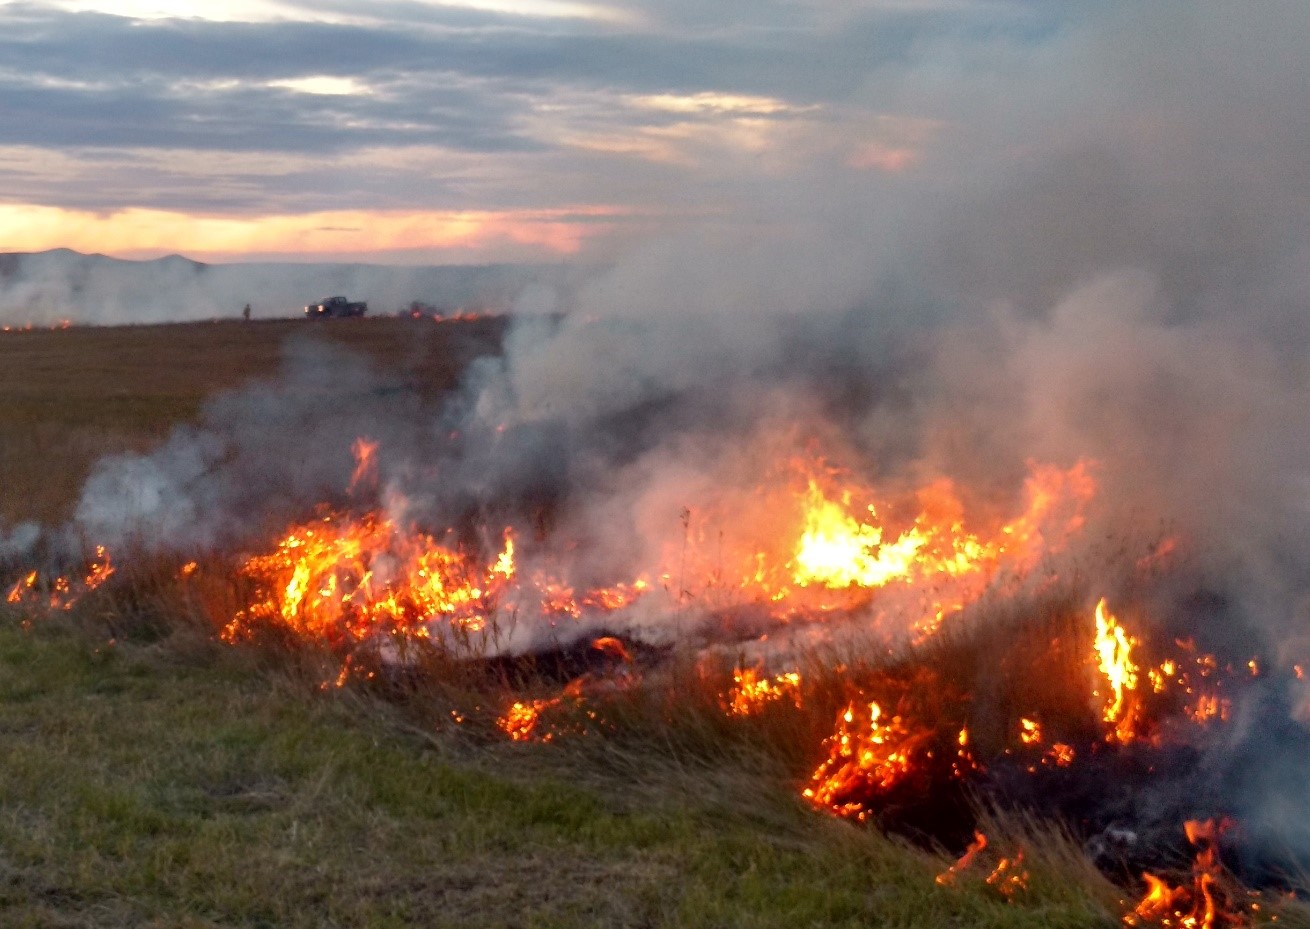 Wildfires prior to the growing season should have no impact on the plant community in terms of species change on rangelands, plant density on grass hay stands or forage production of new growth. (NDSU photo)